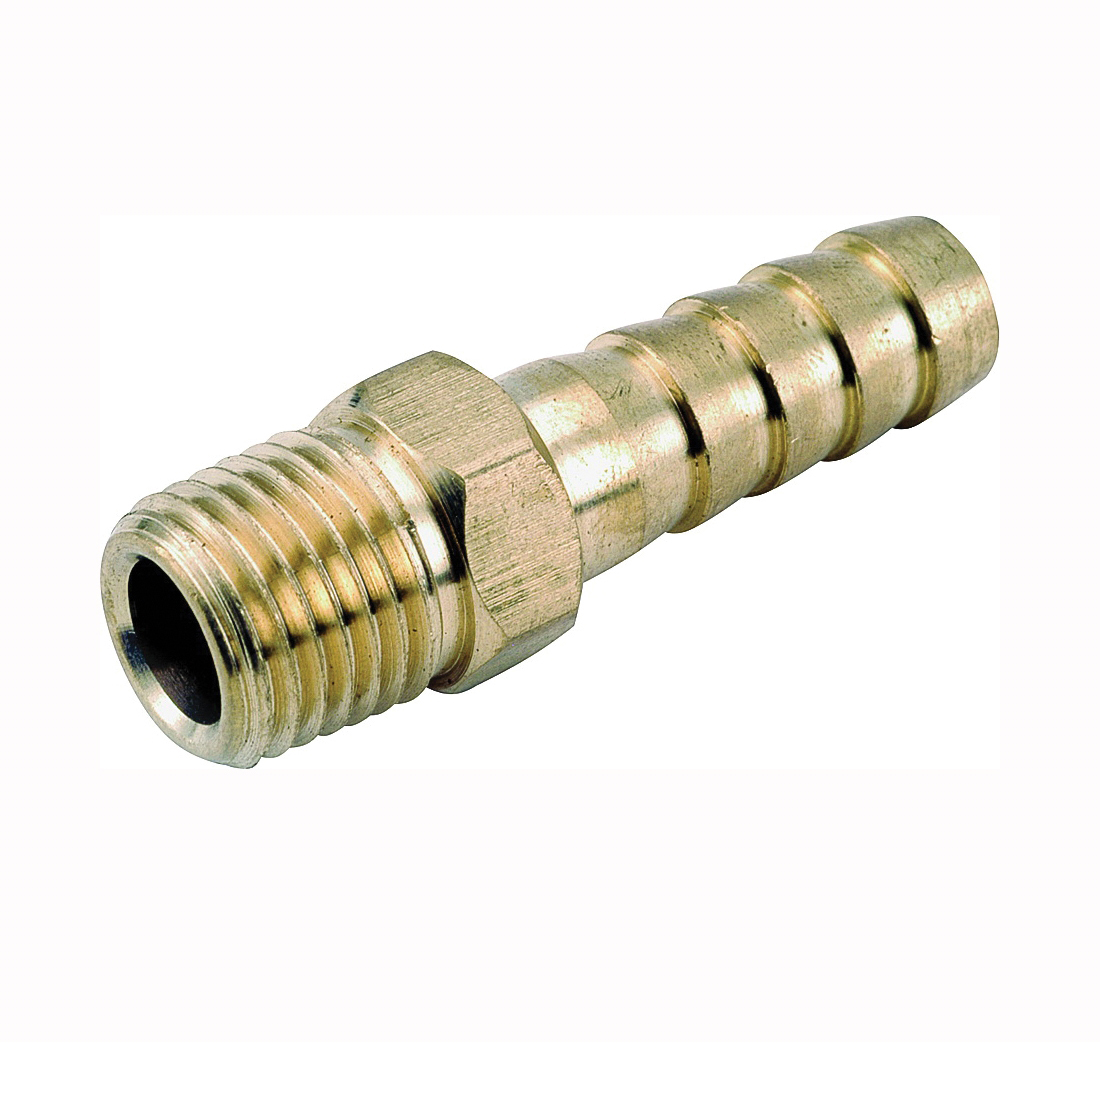 129 Series 757001-0806 Hose Adapter, 1/2 in, Barb, 3/8 in, MPT, Brass